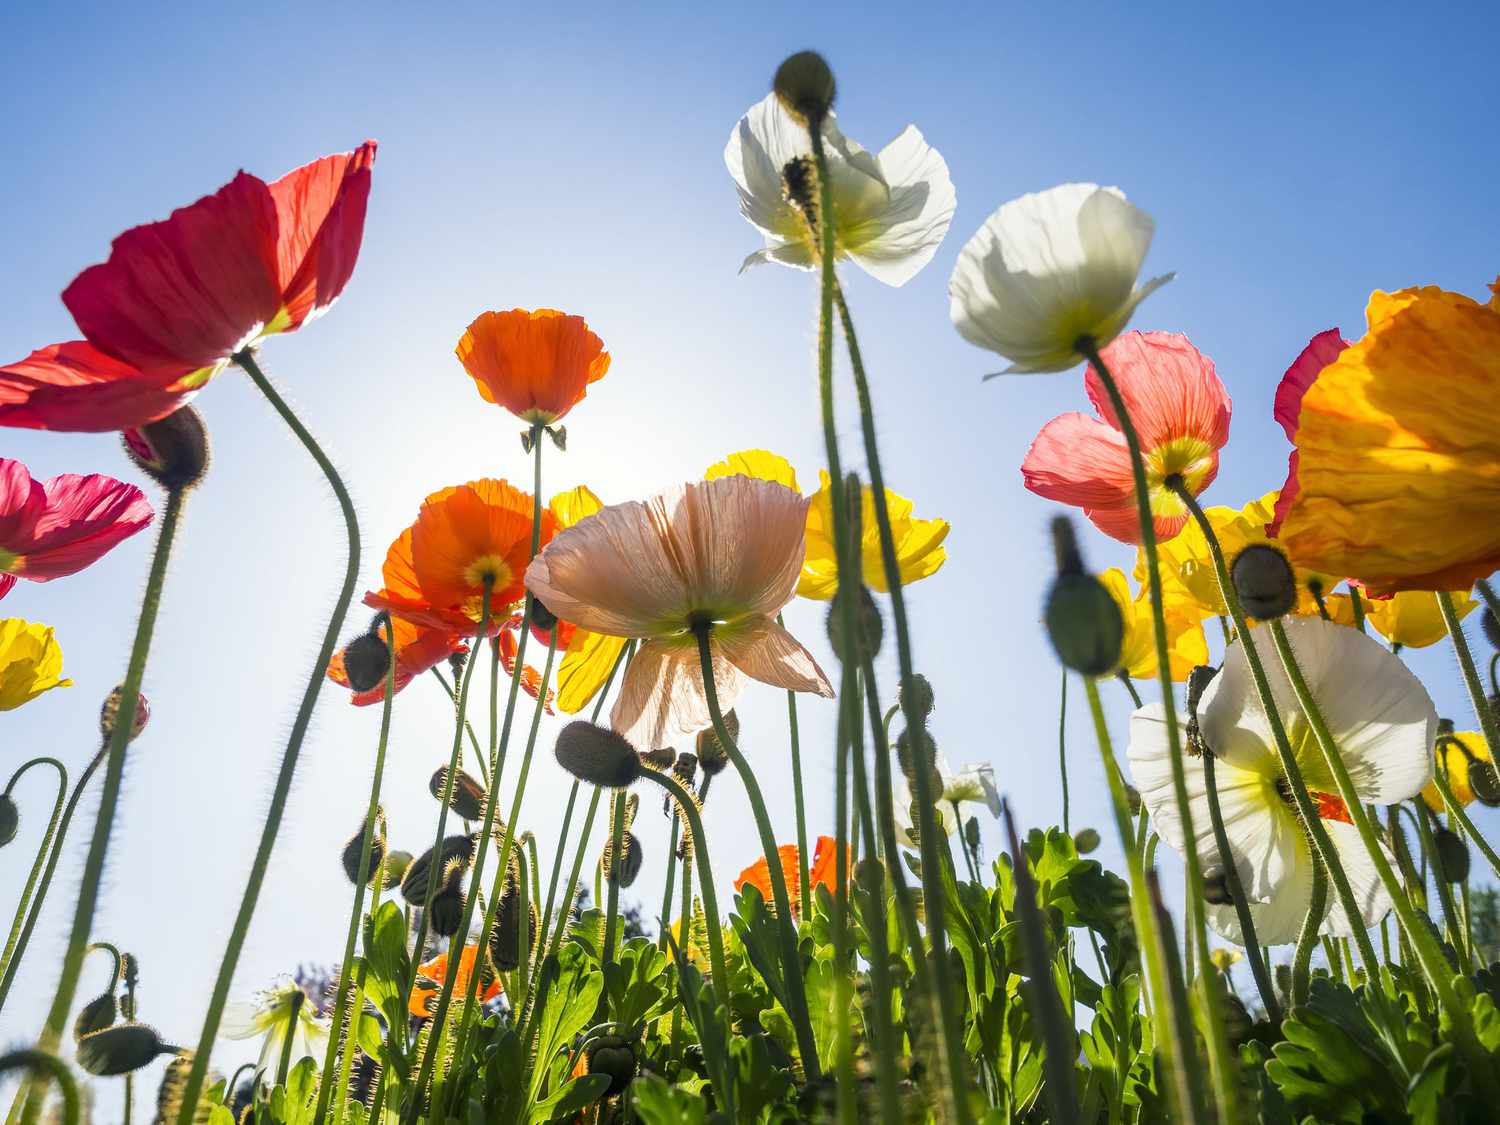 Icelandic poppies in different colors against blue sky